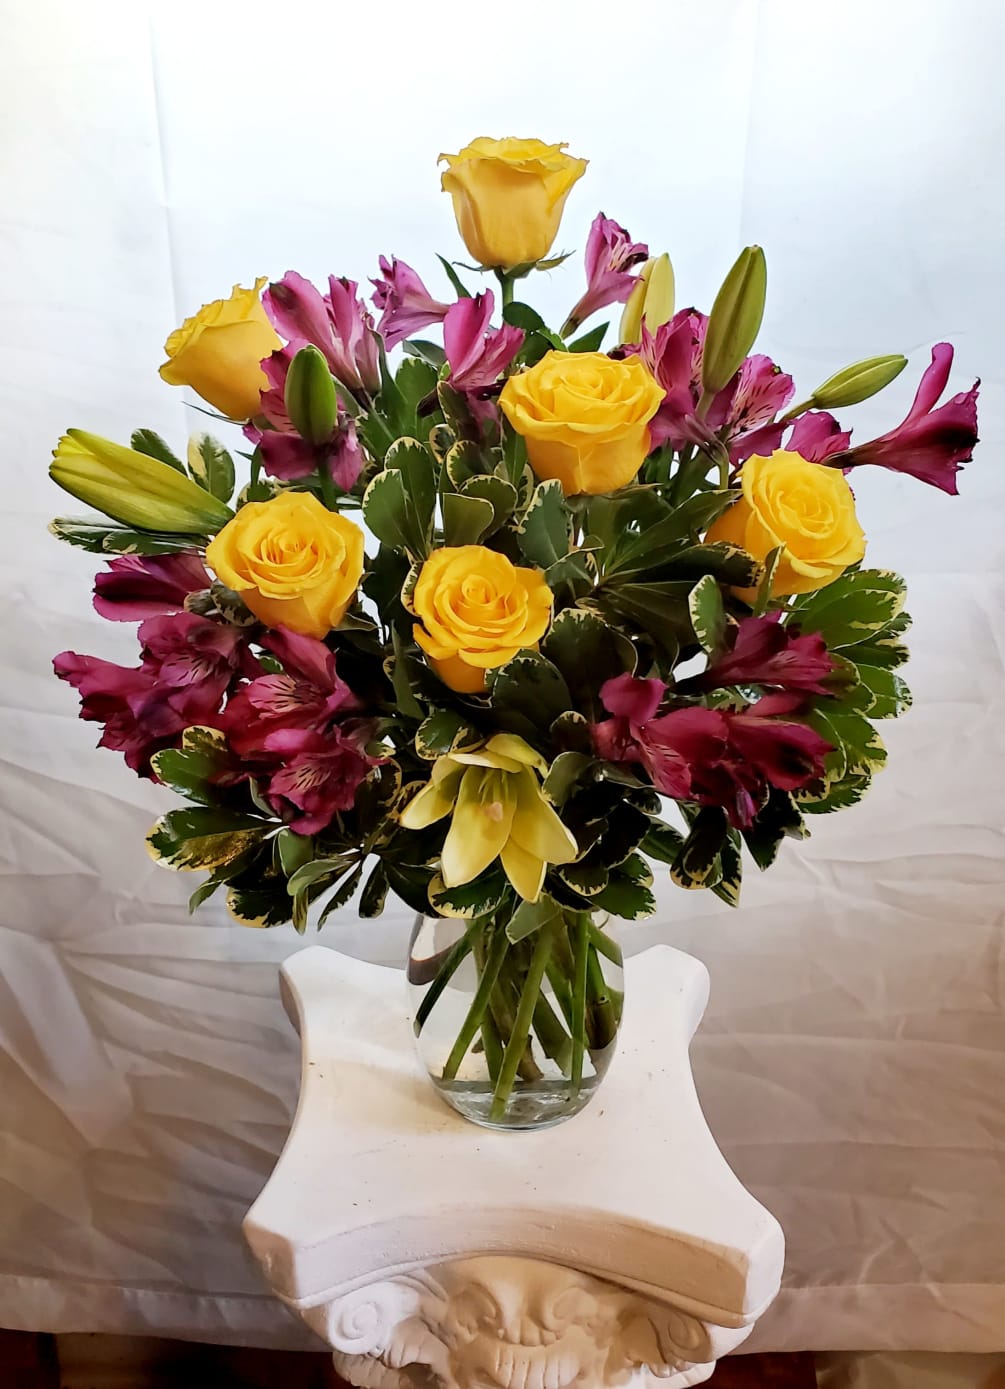 Yellow roses are a symbolism of friendship. Beautifully acciented with stunning purple